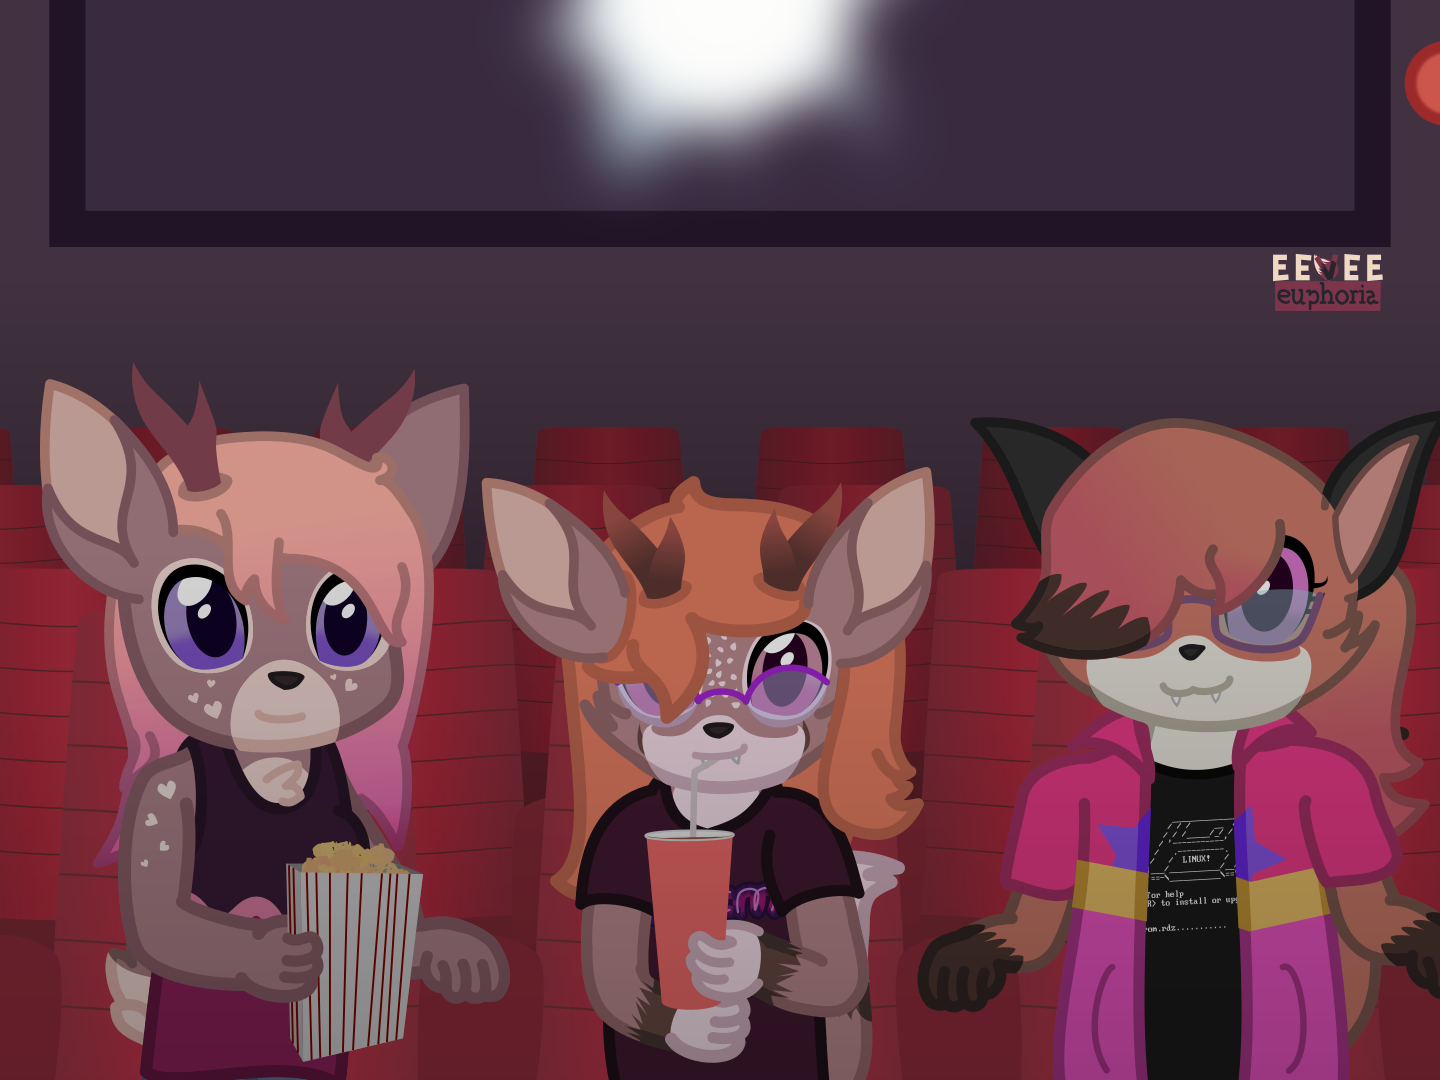 A deer, a deerfox, and a fox are sitting in a theater, all watching a movie together.